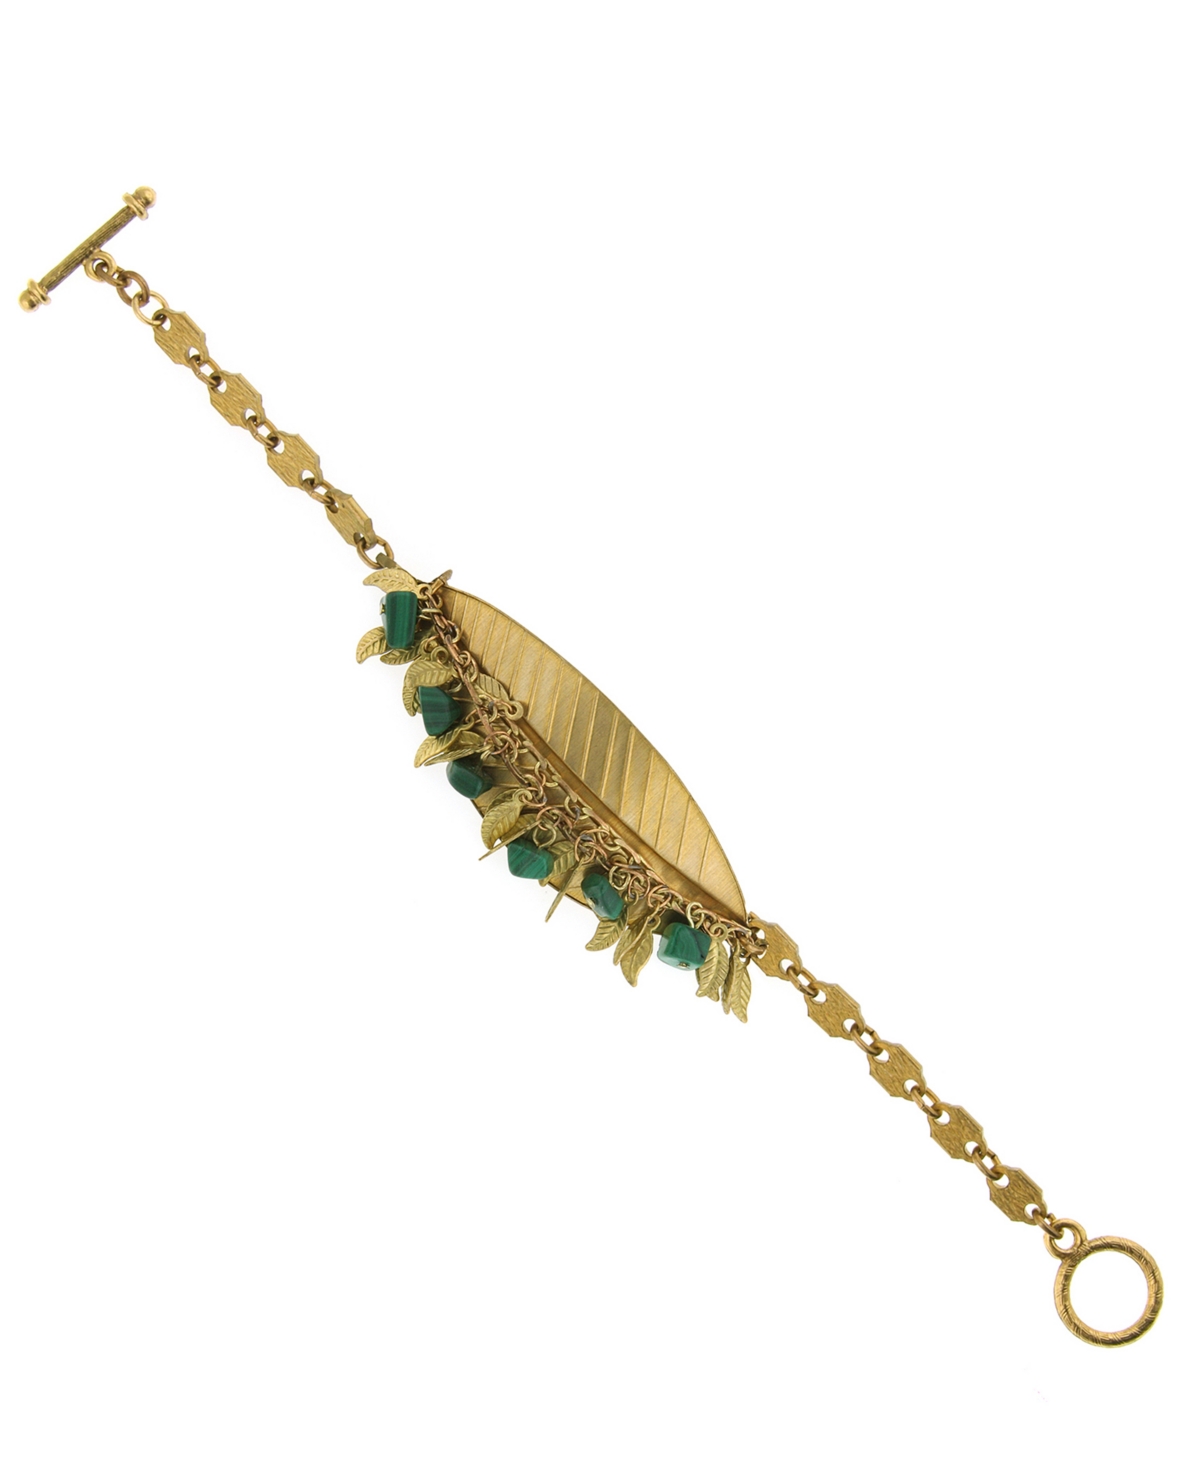 T.r.u. by 1928 Gold Tone Leaf Toggle Bracelet Accented with Semi-Precious Malachite Chips - Green